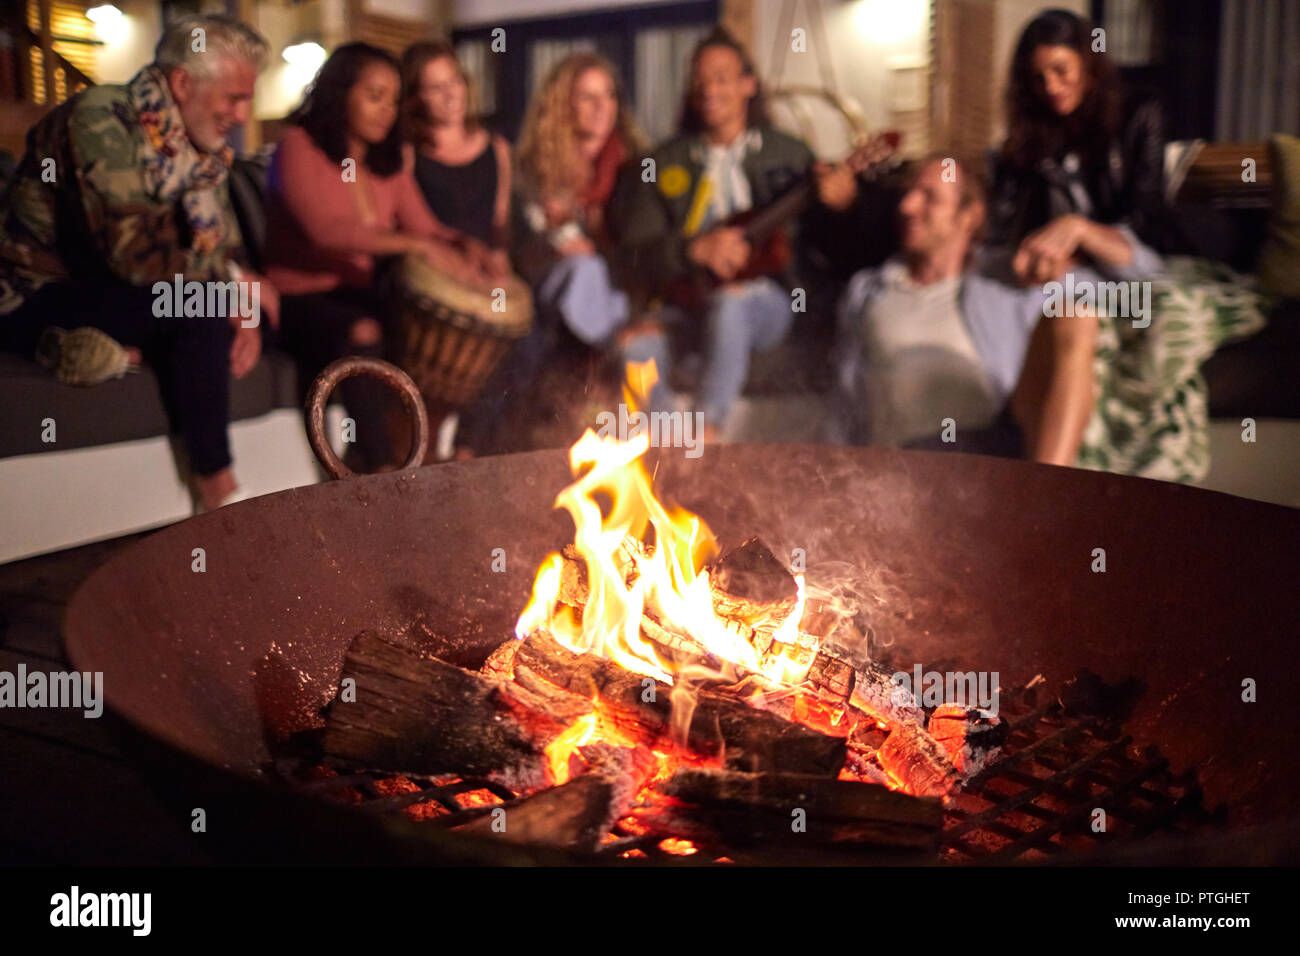 Friends hanging out, playing music on patio next to fire pit Stock Photo